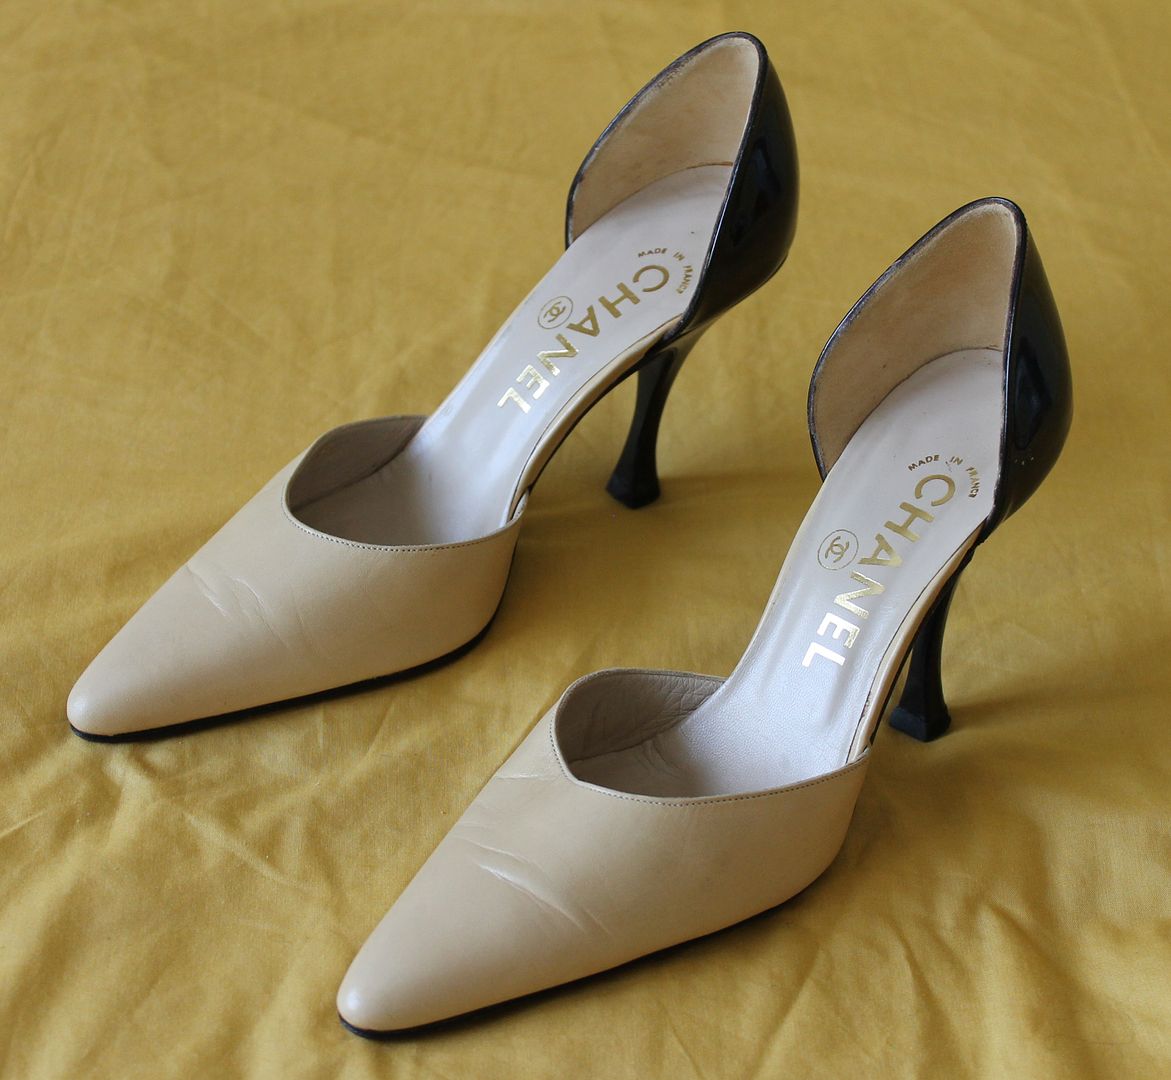 CHANEL Stiletto High Heel Shoes - Great 